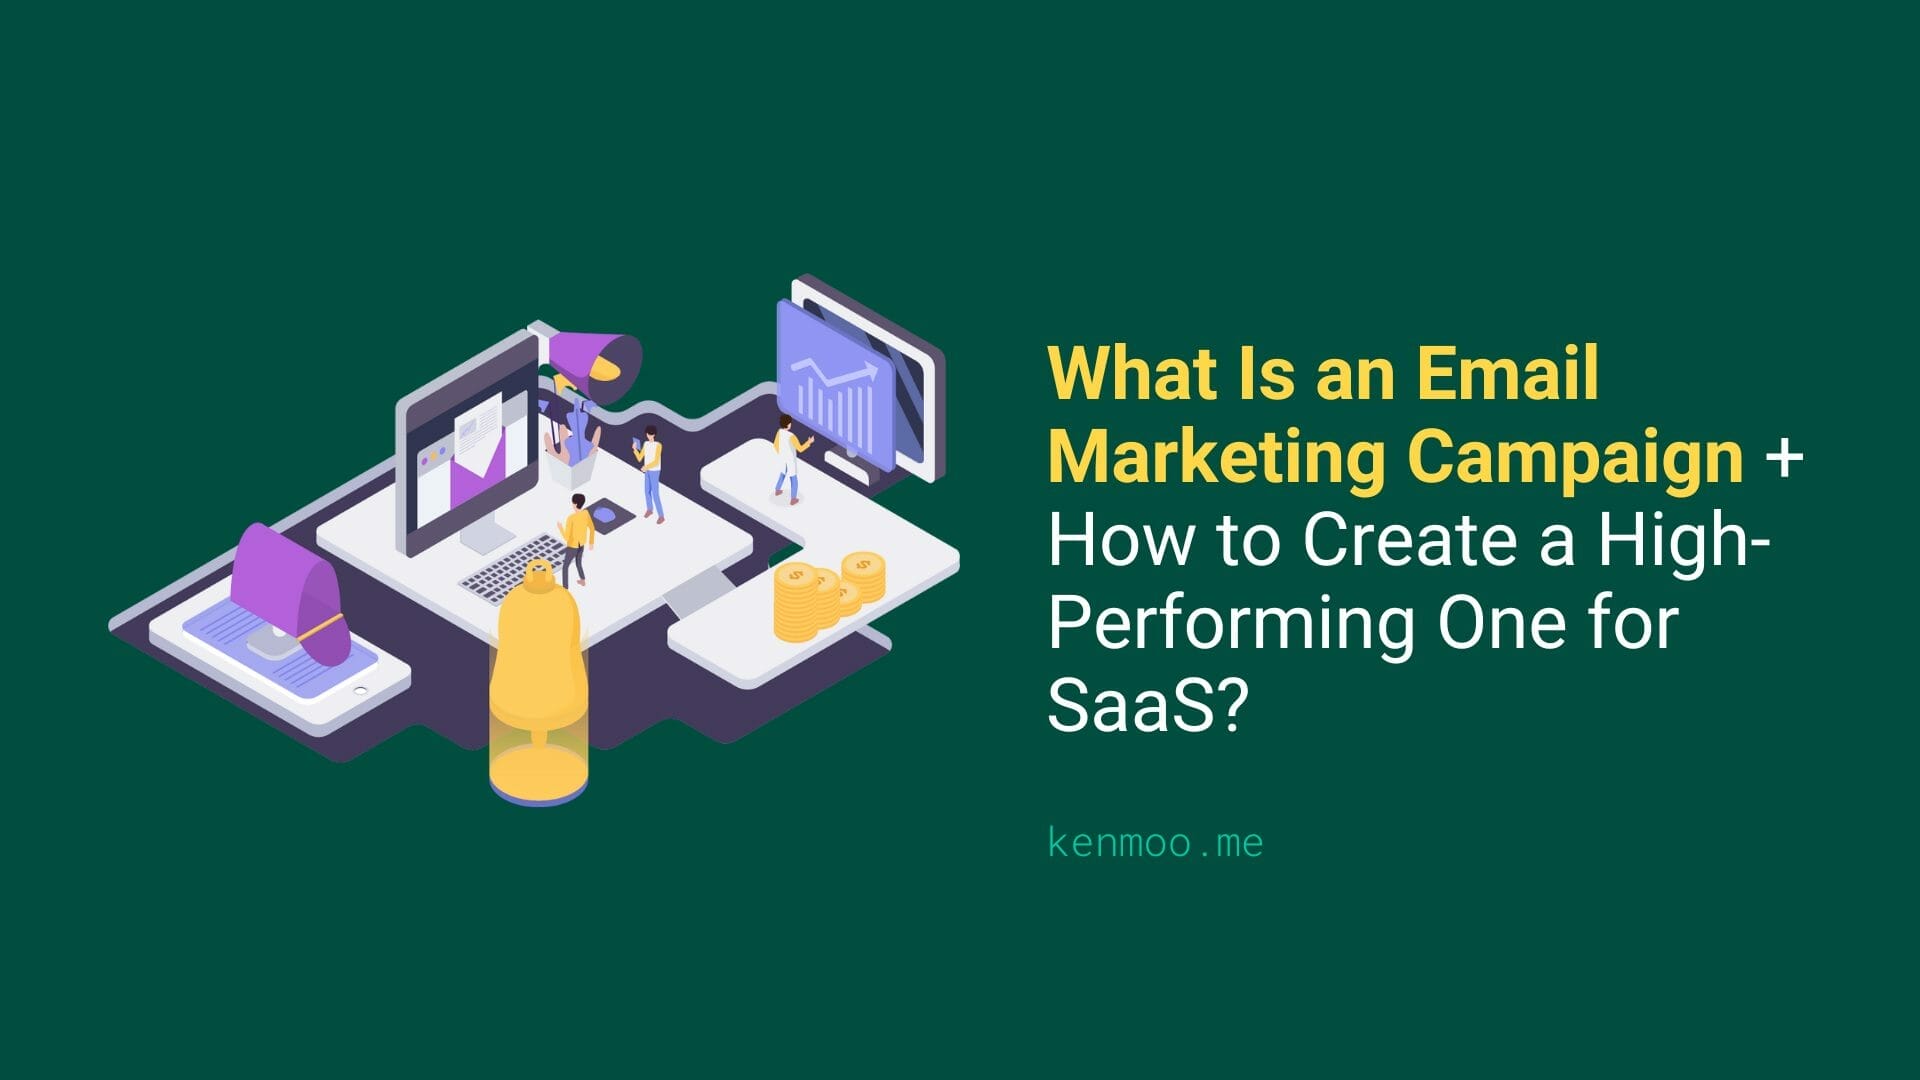 What Is an Email Marketing Campaign + How to Create a High-Performing One for SaaS?